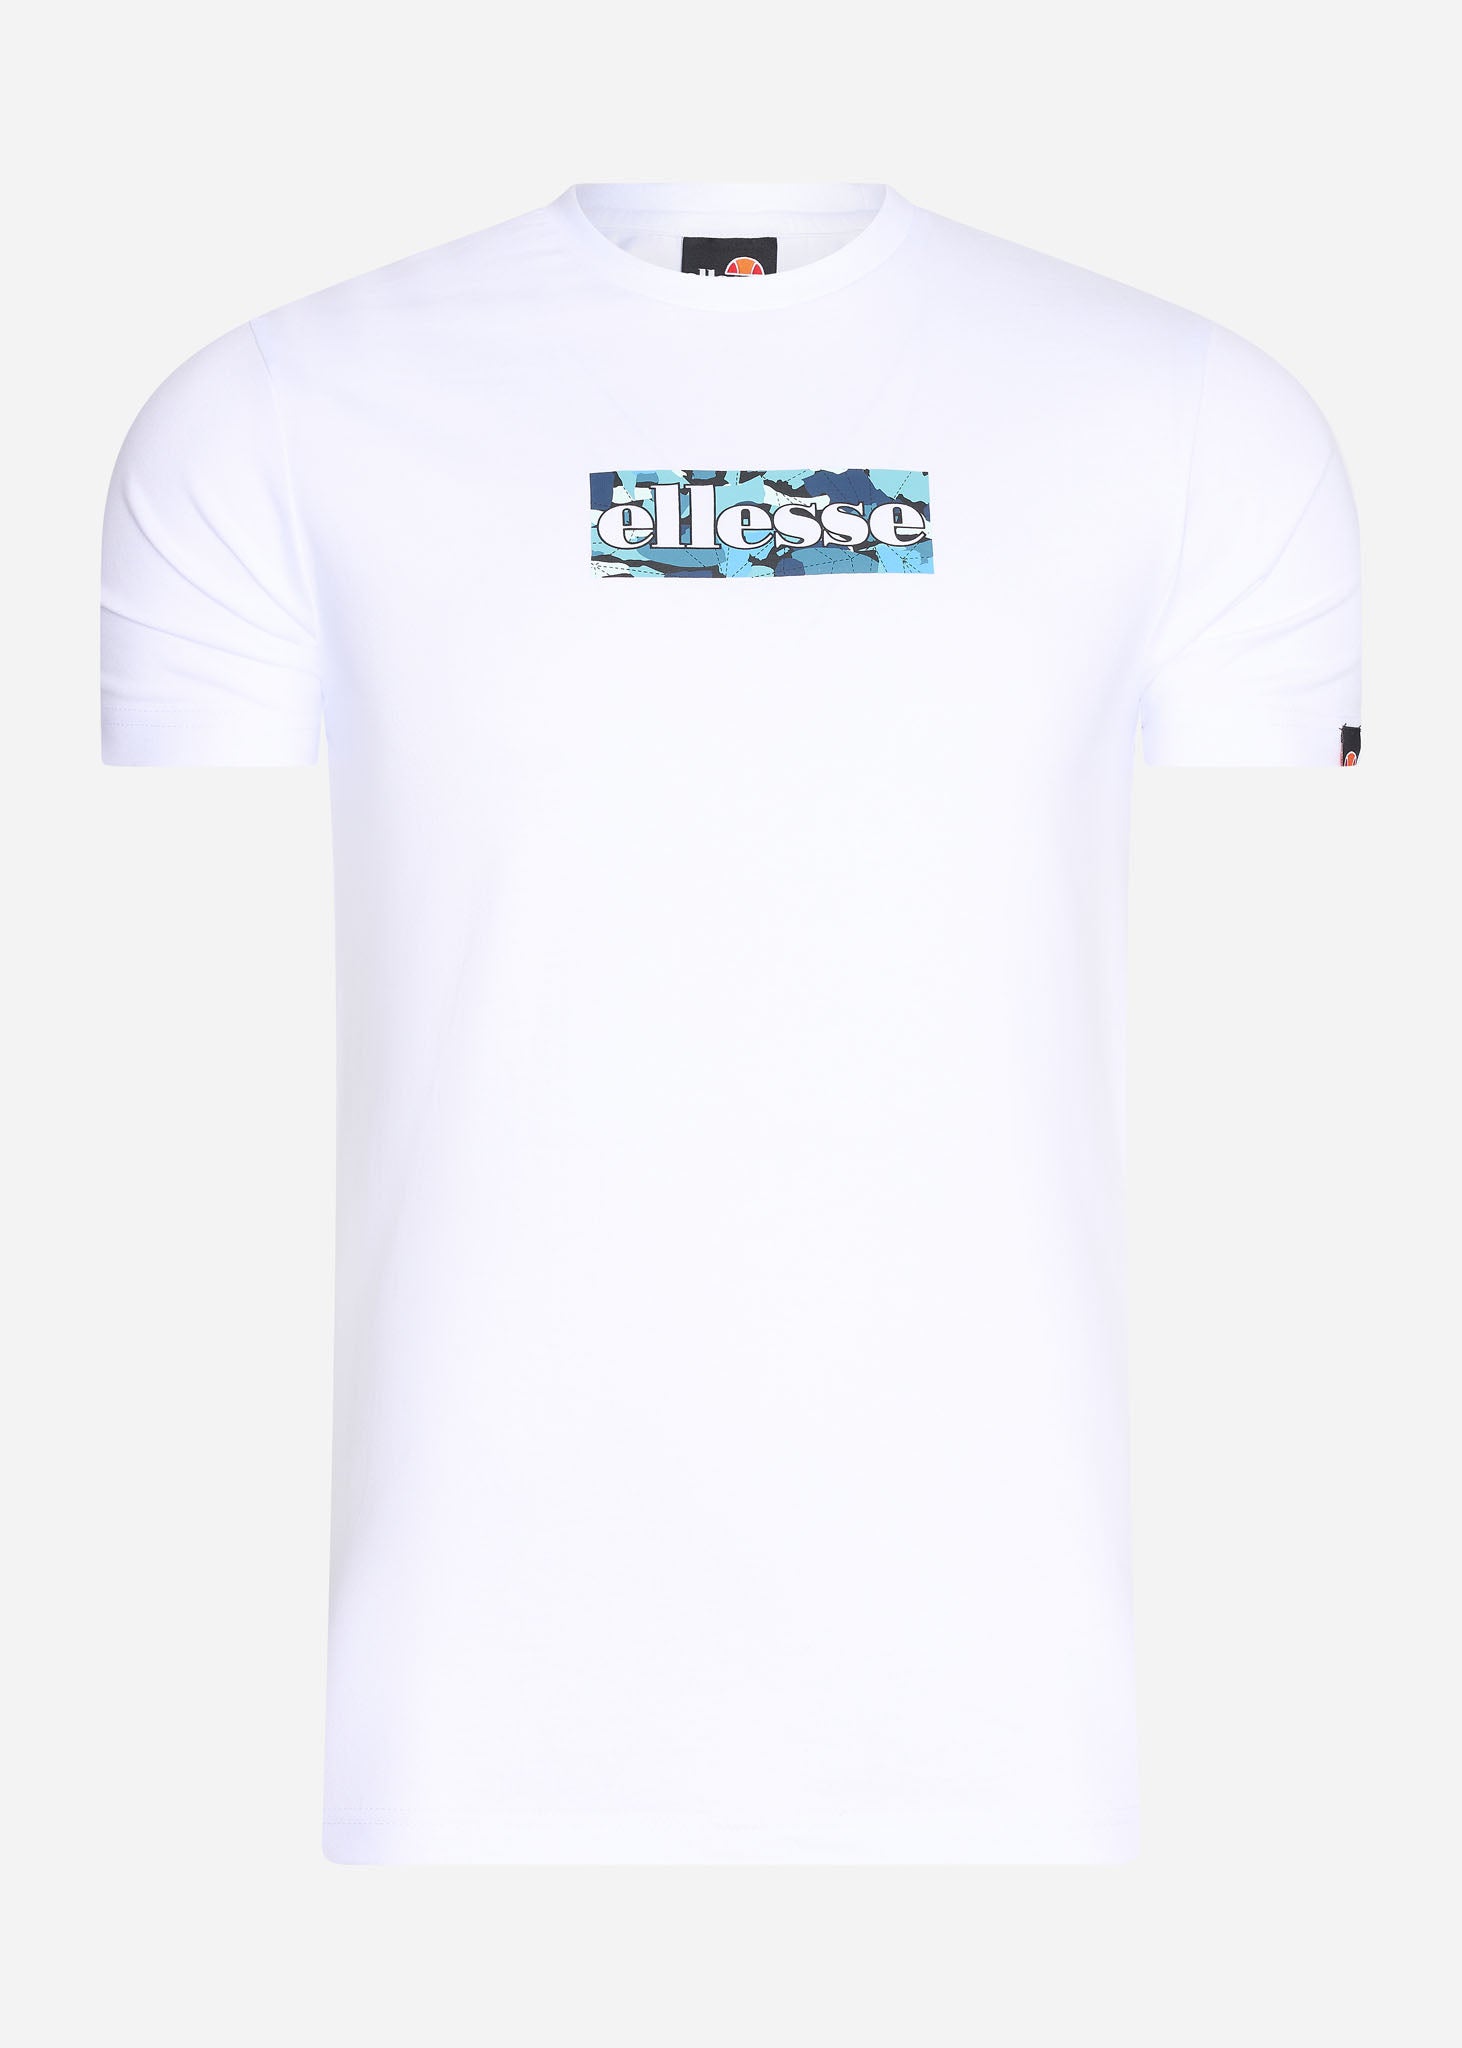 Ellesse t-shirt white with print